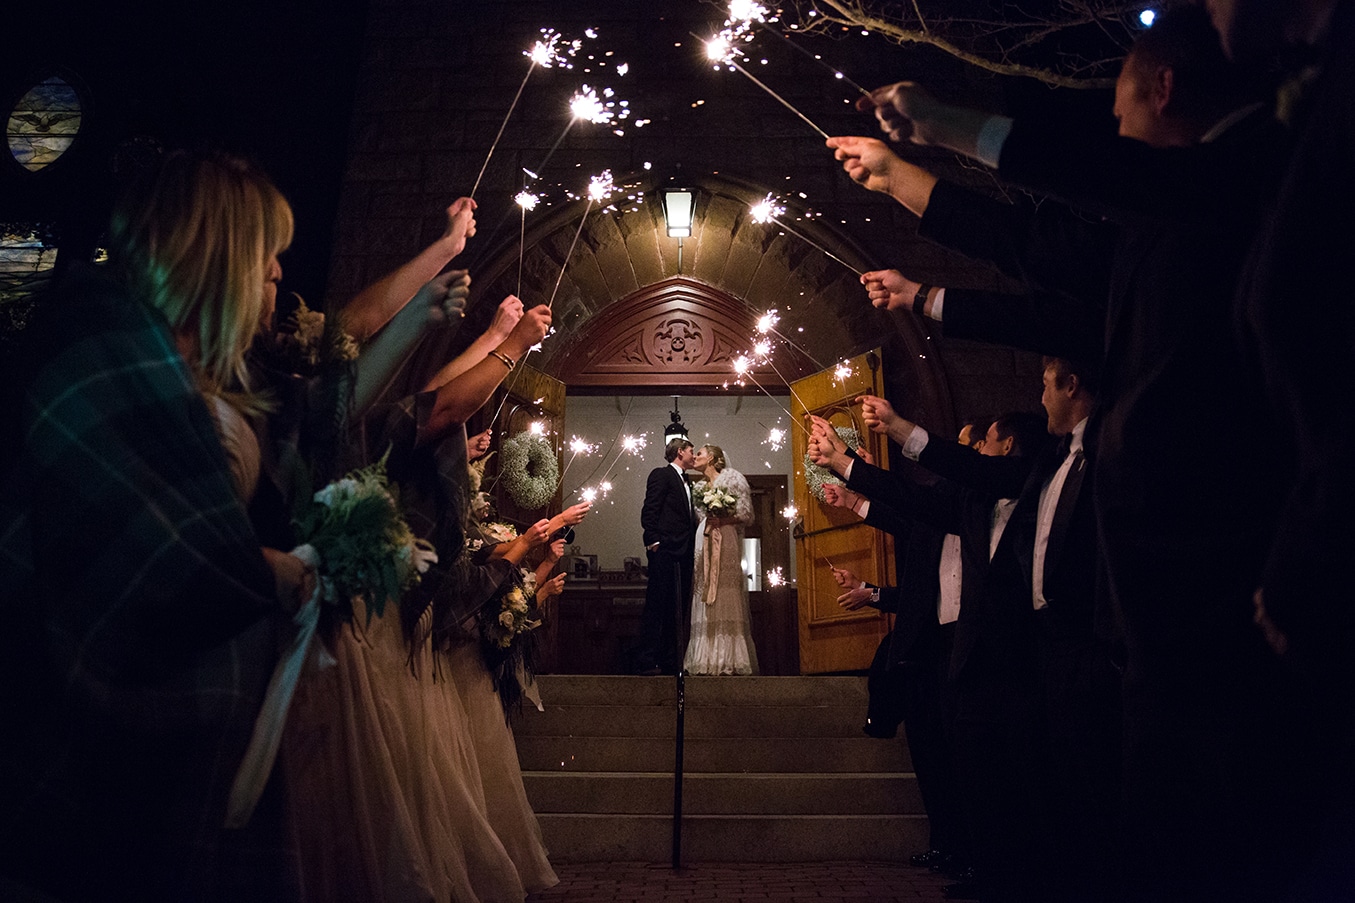 This documentary photograph of a bride and groom leaving the church through a sparkler exit is one of the best wedding photographs of 2016